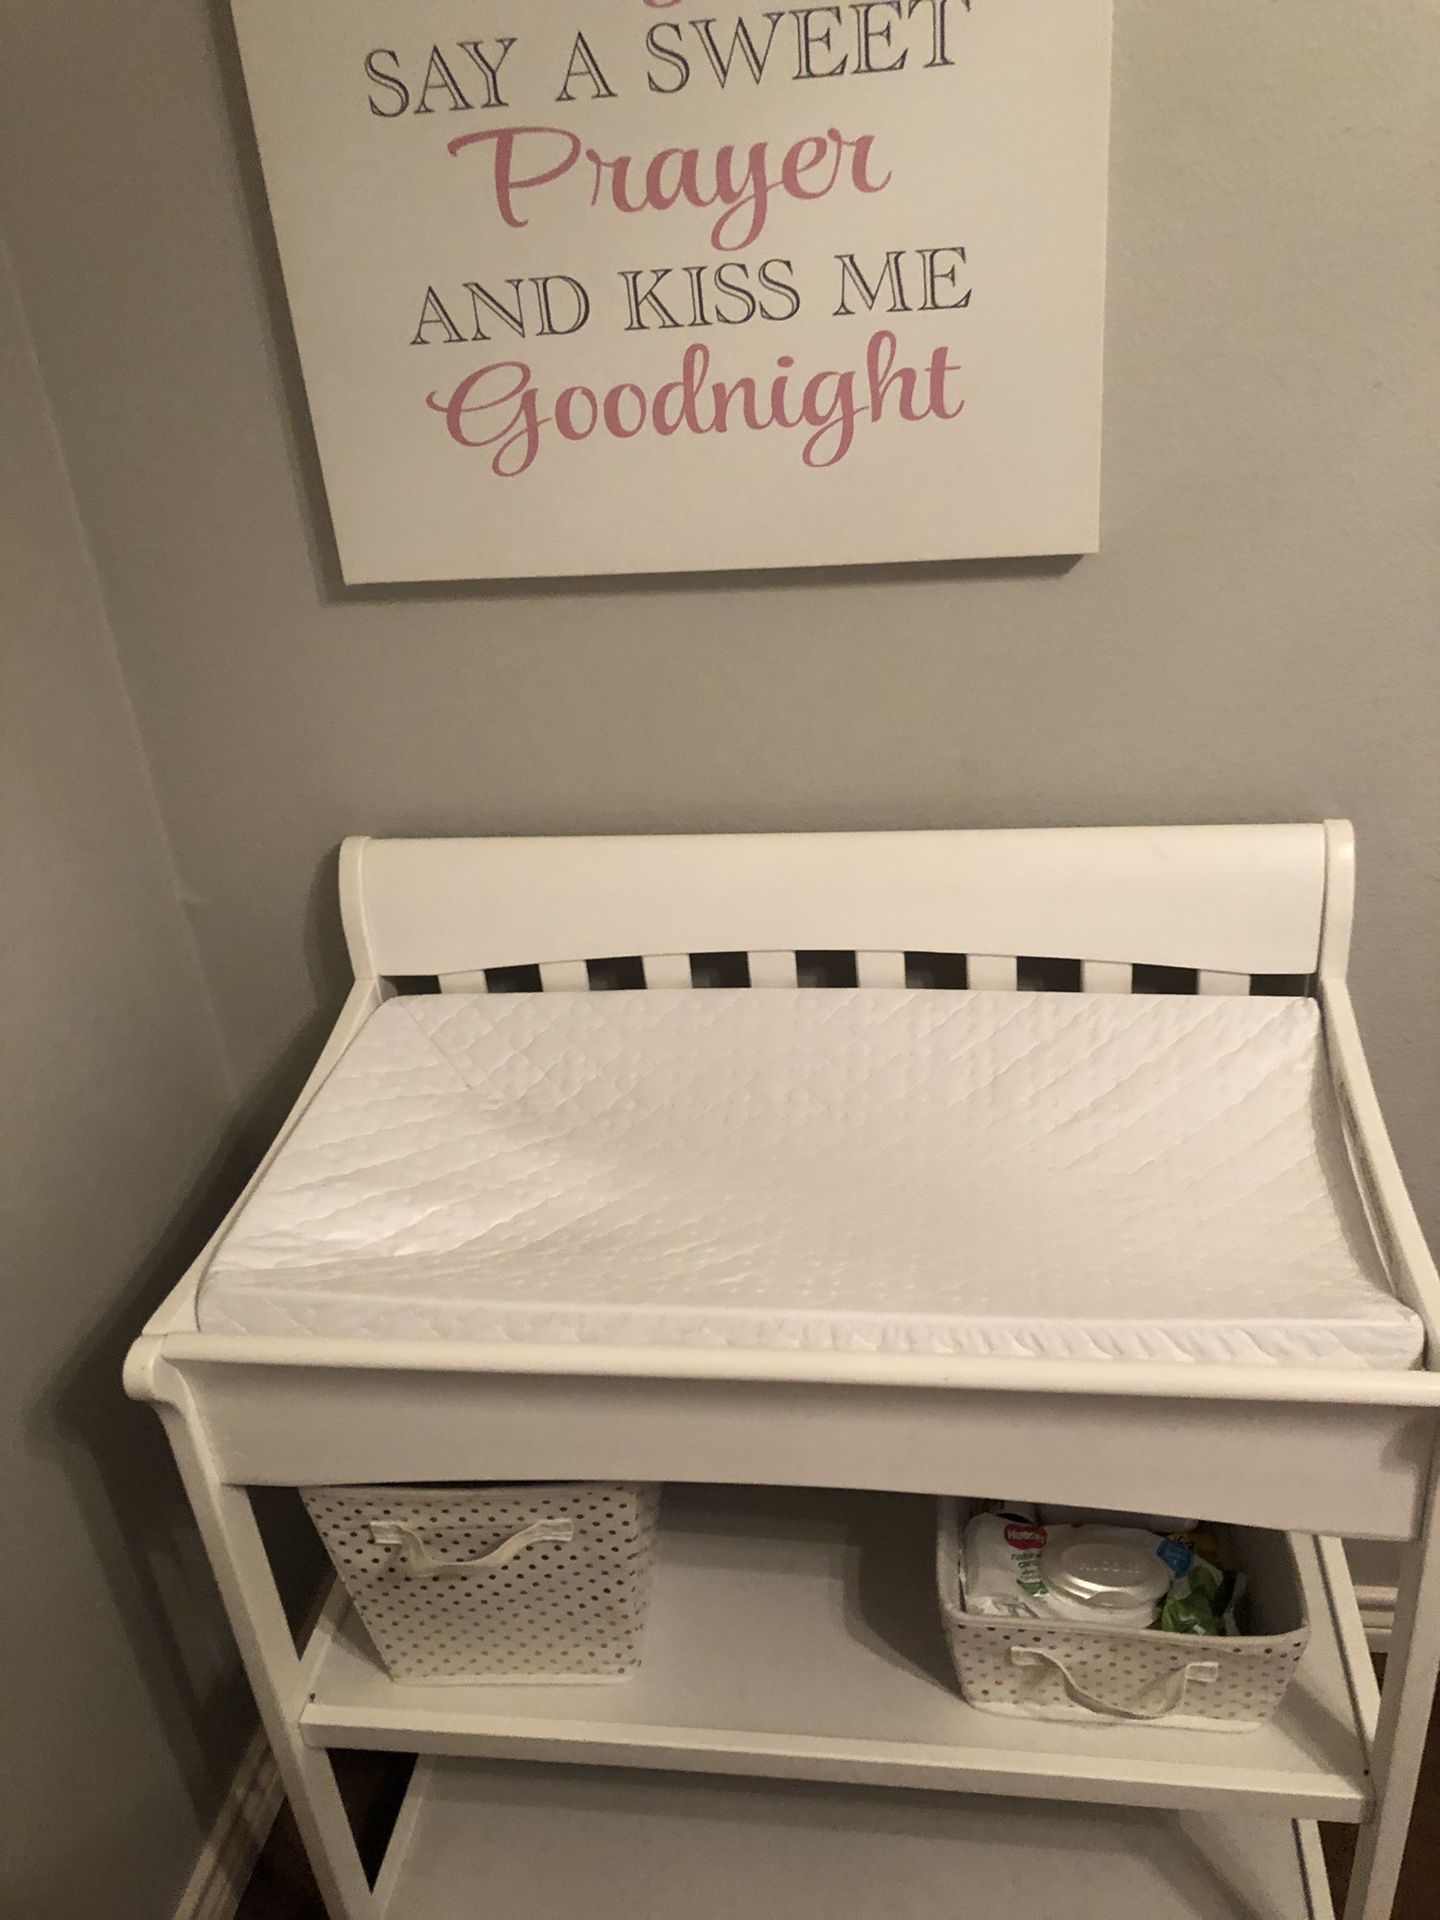 White diaper changing table w/ pad - 2 shelves underneath